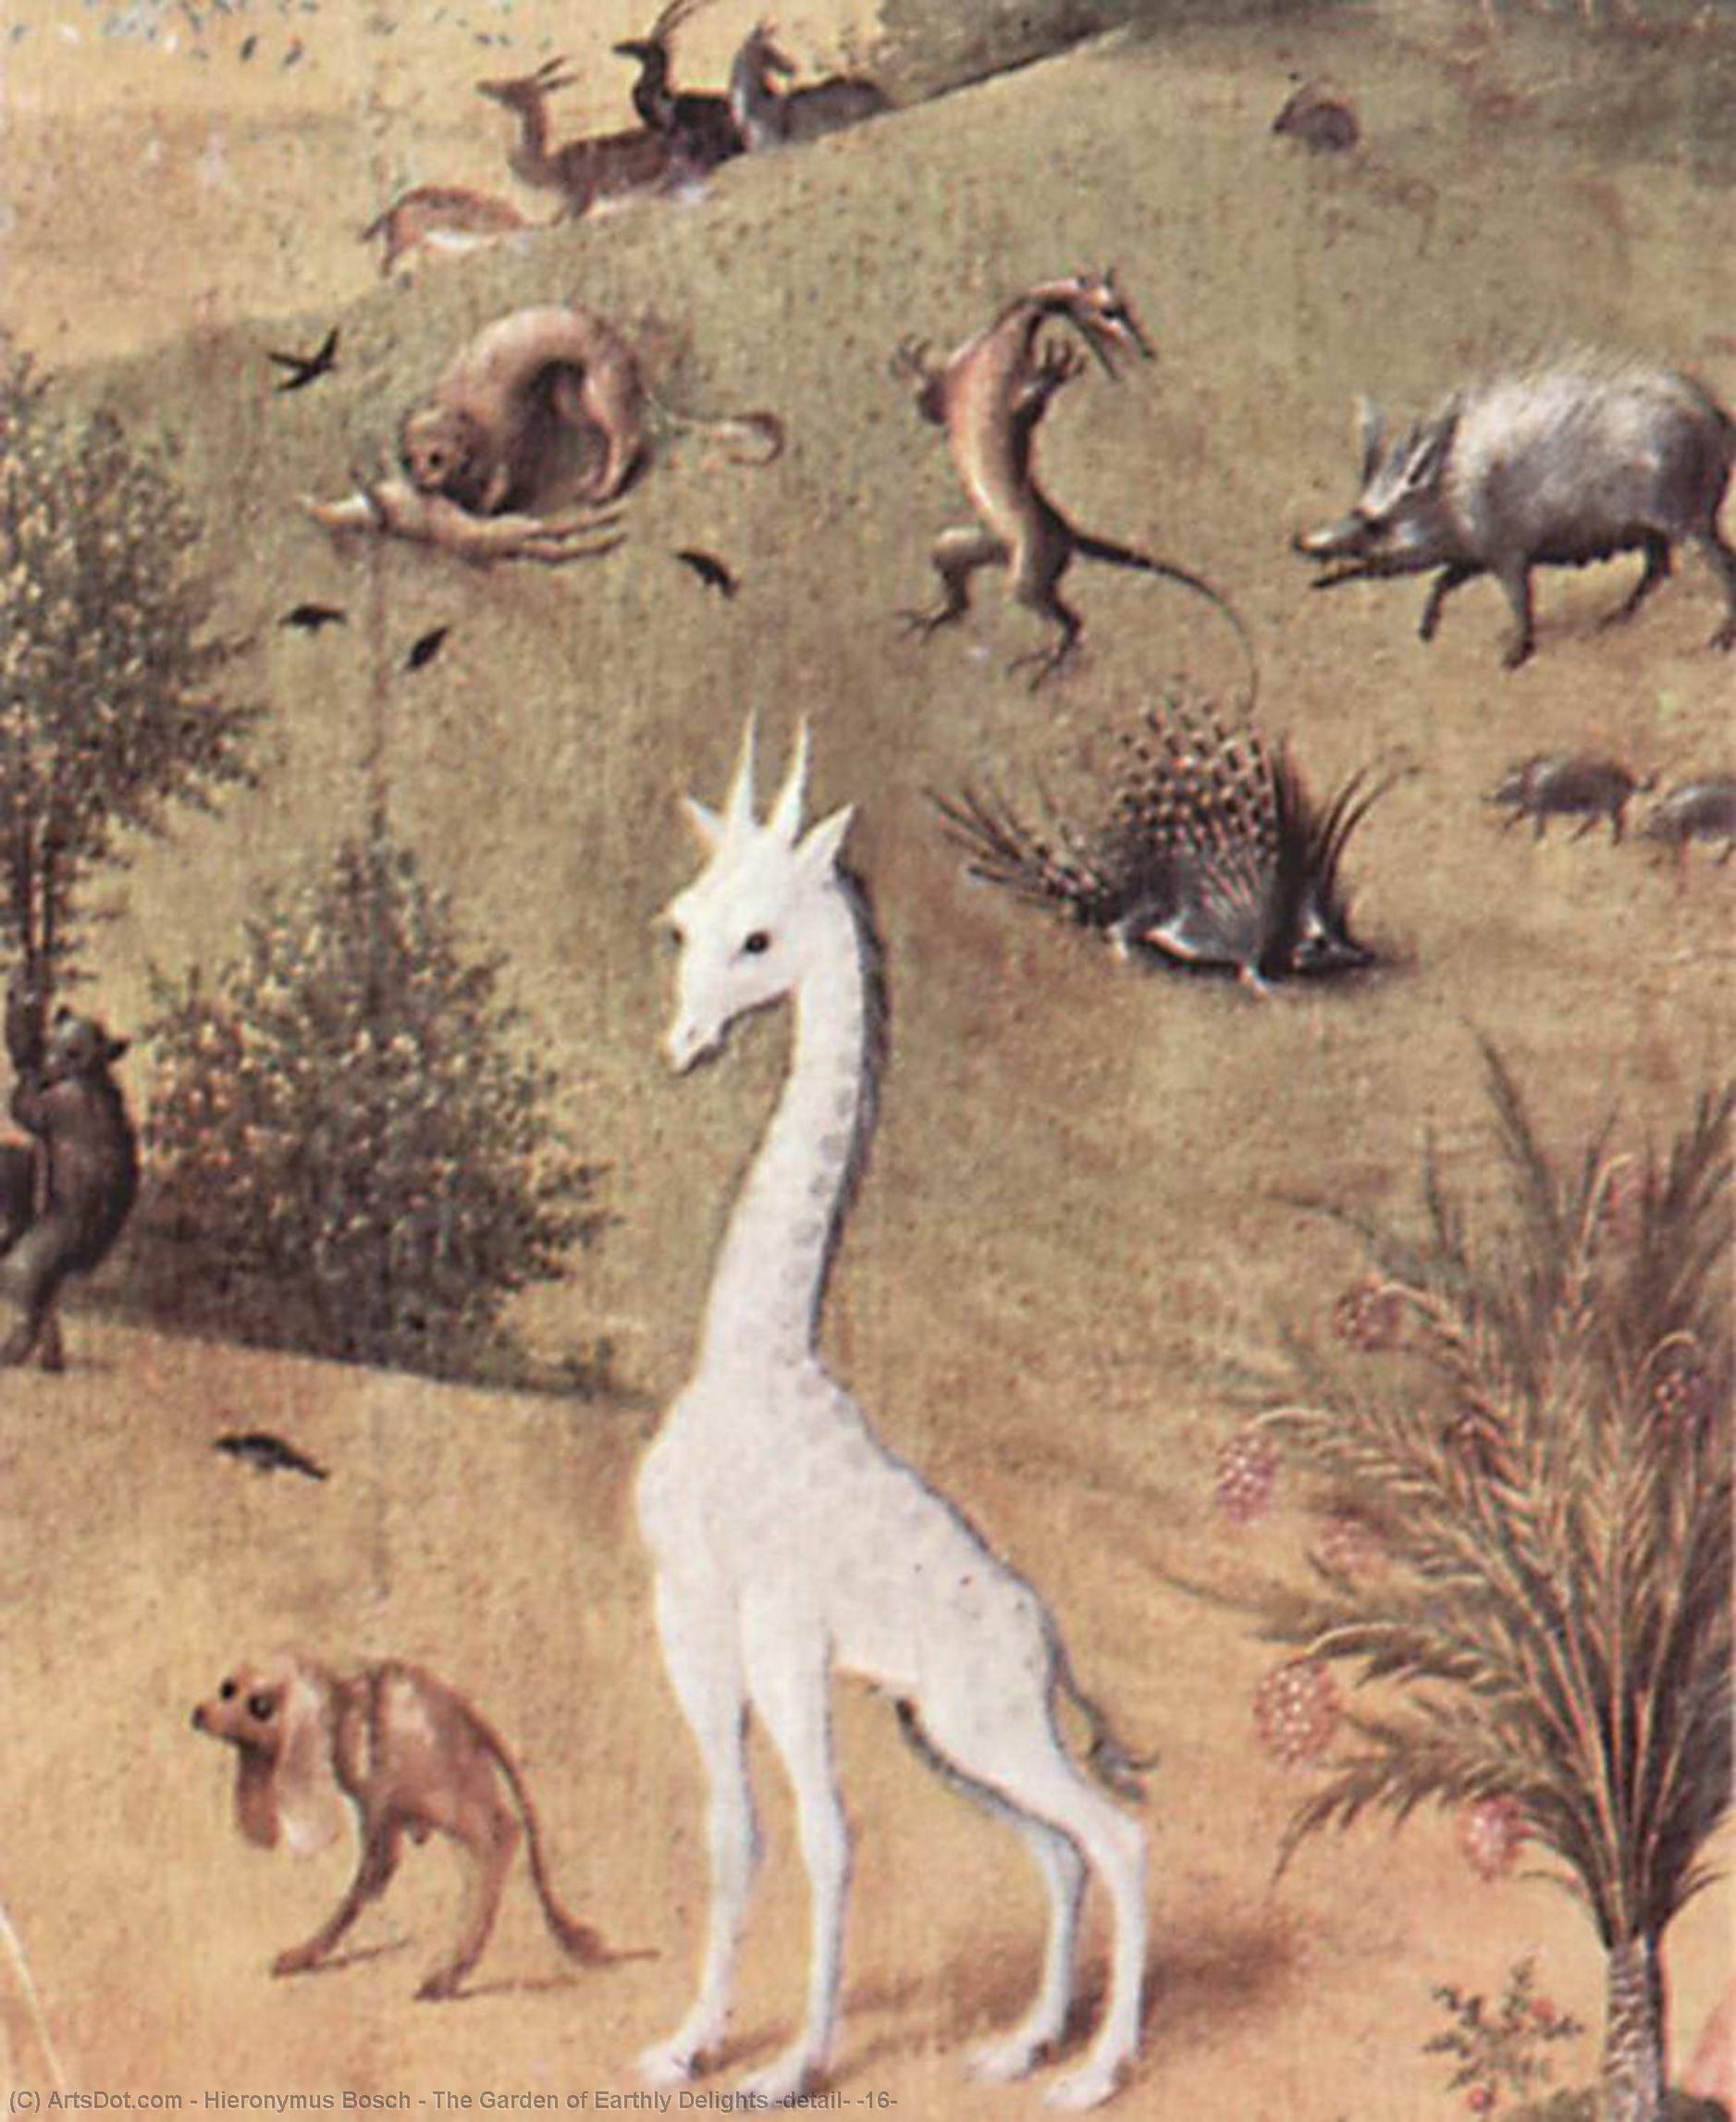 WikiOO.org - 백과 사전 - 회화, 삽화 Hieronymus Bosch - The Garden of Earthly Delights (detail) (16)